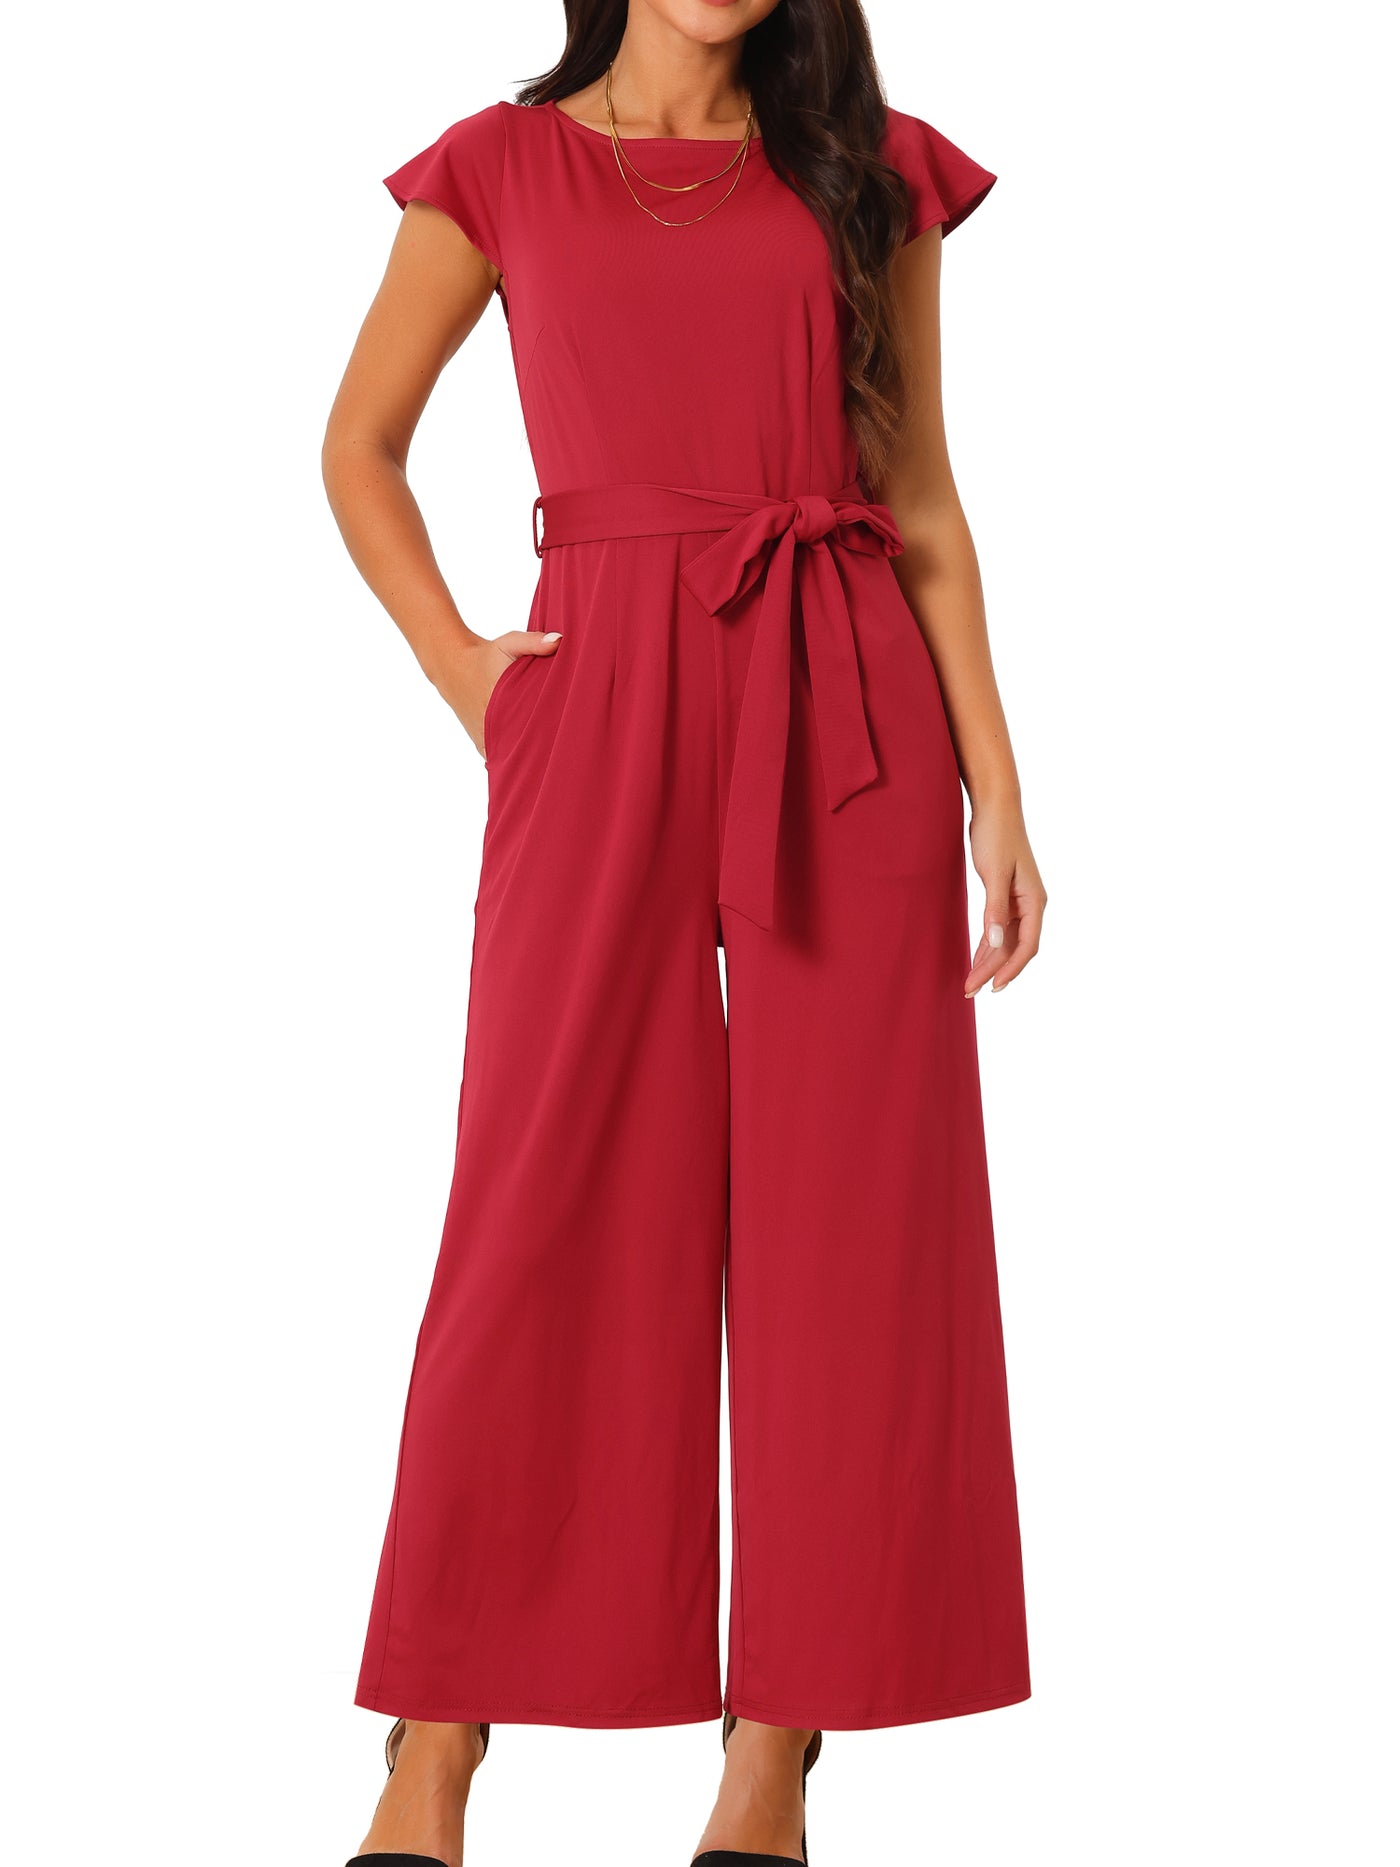 Bublédon Women's Crew Neck Ruffle Cap Sleeve Belted High Waist Wide Leg Casual Dressy Jumpsuits with Pockets